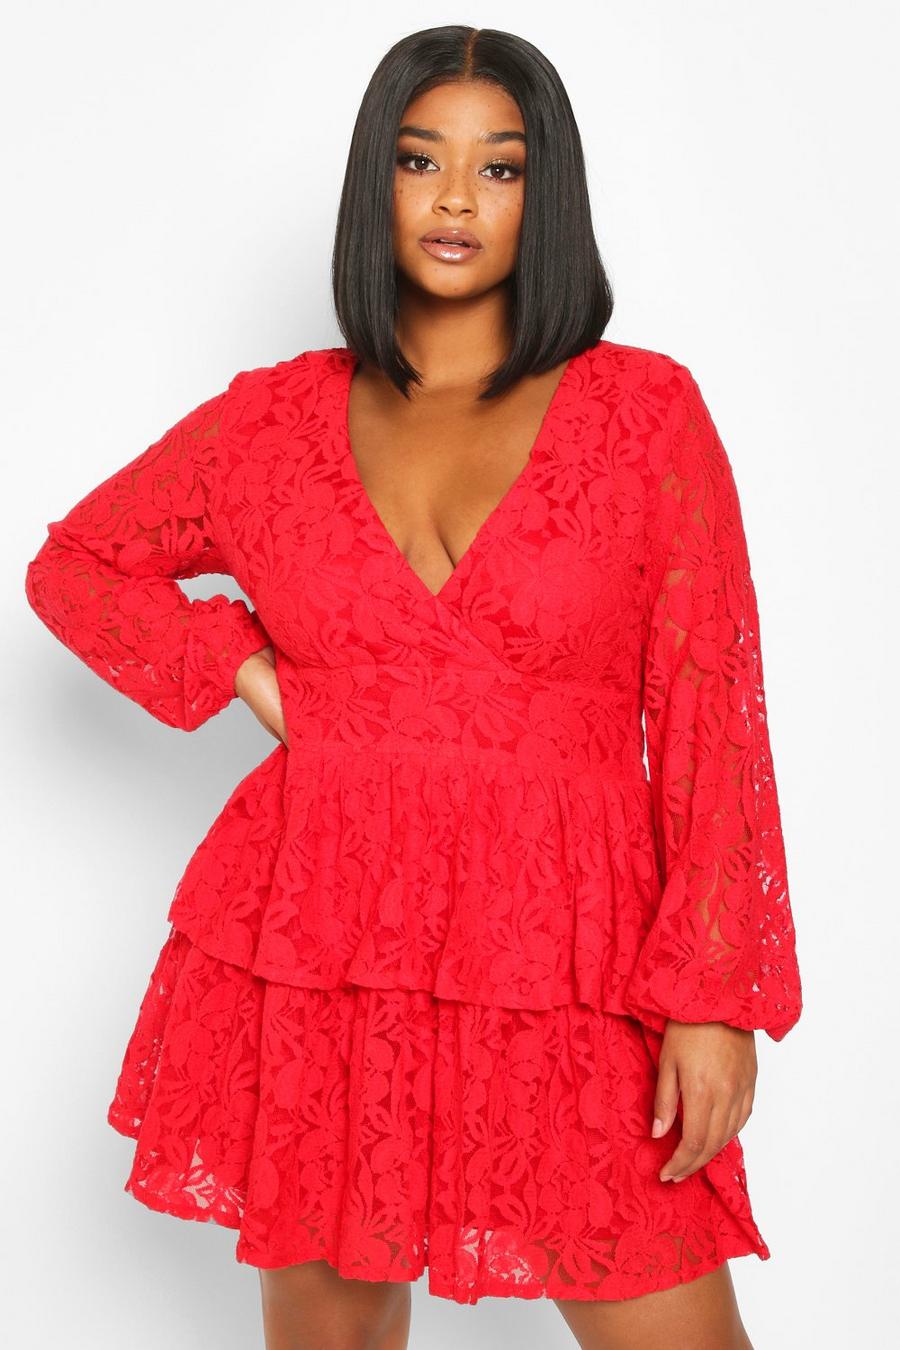 BNWT MISSGUIDED Long Sleeve Red Lace Plunge Skater/Party Dress